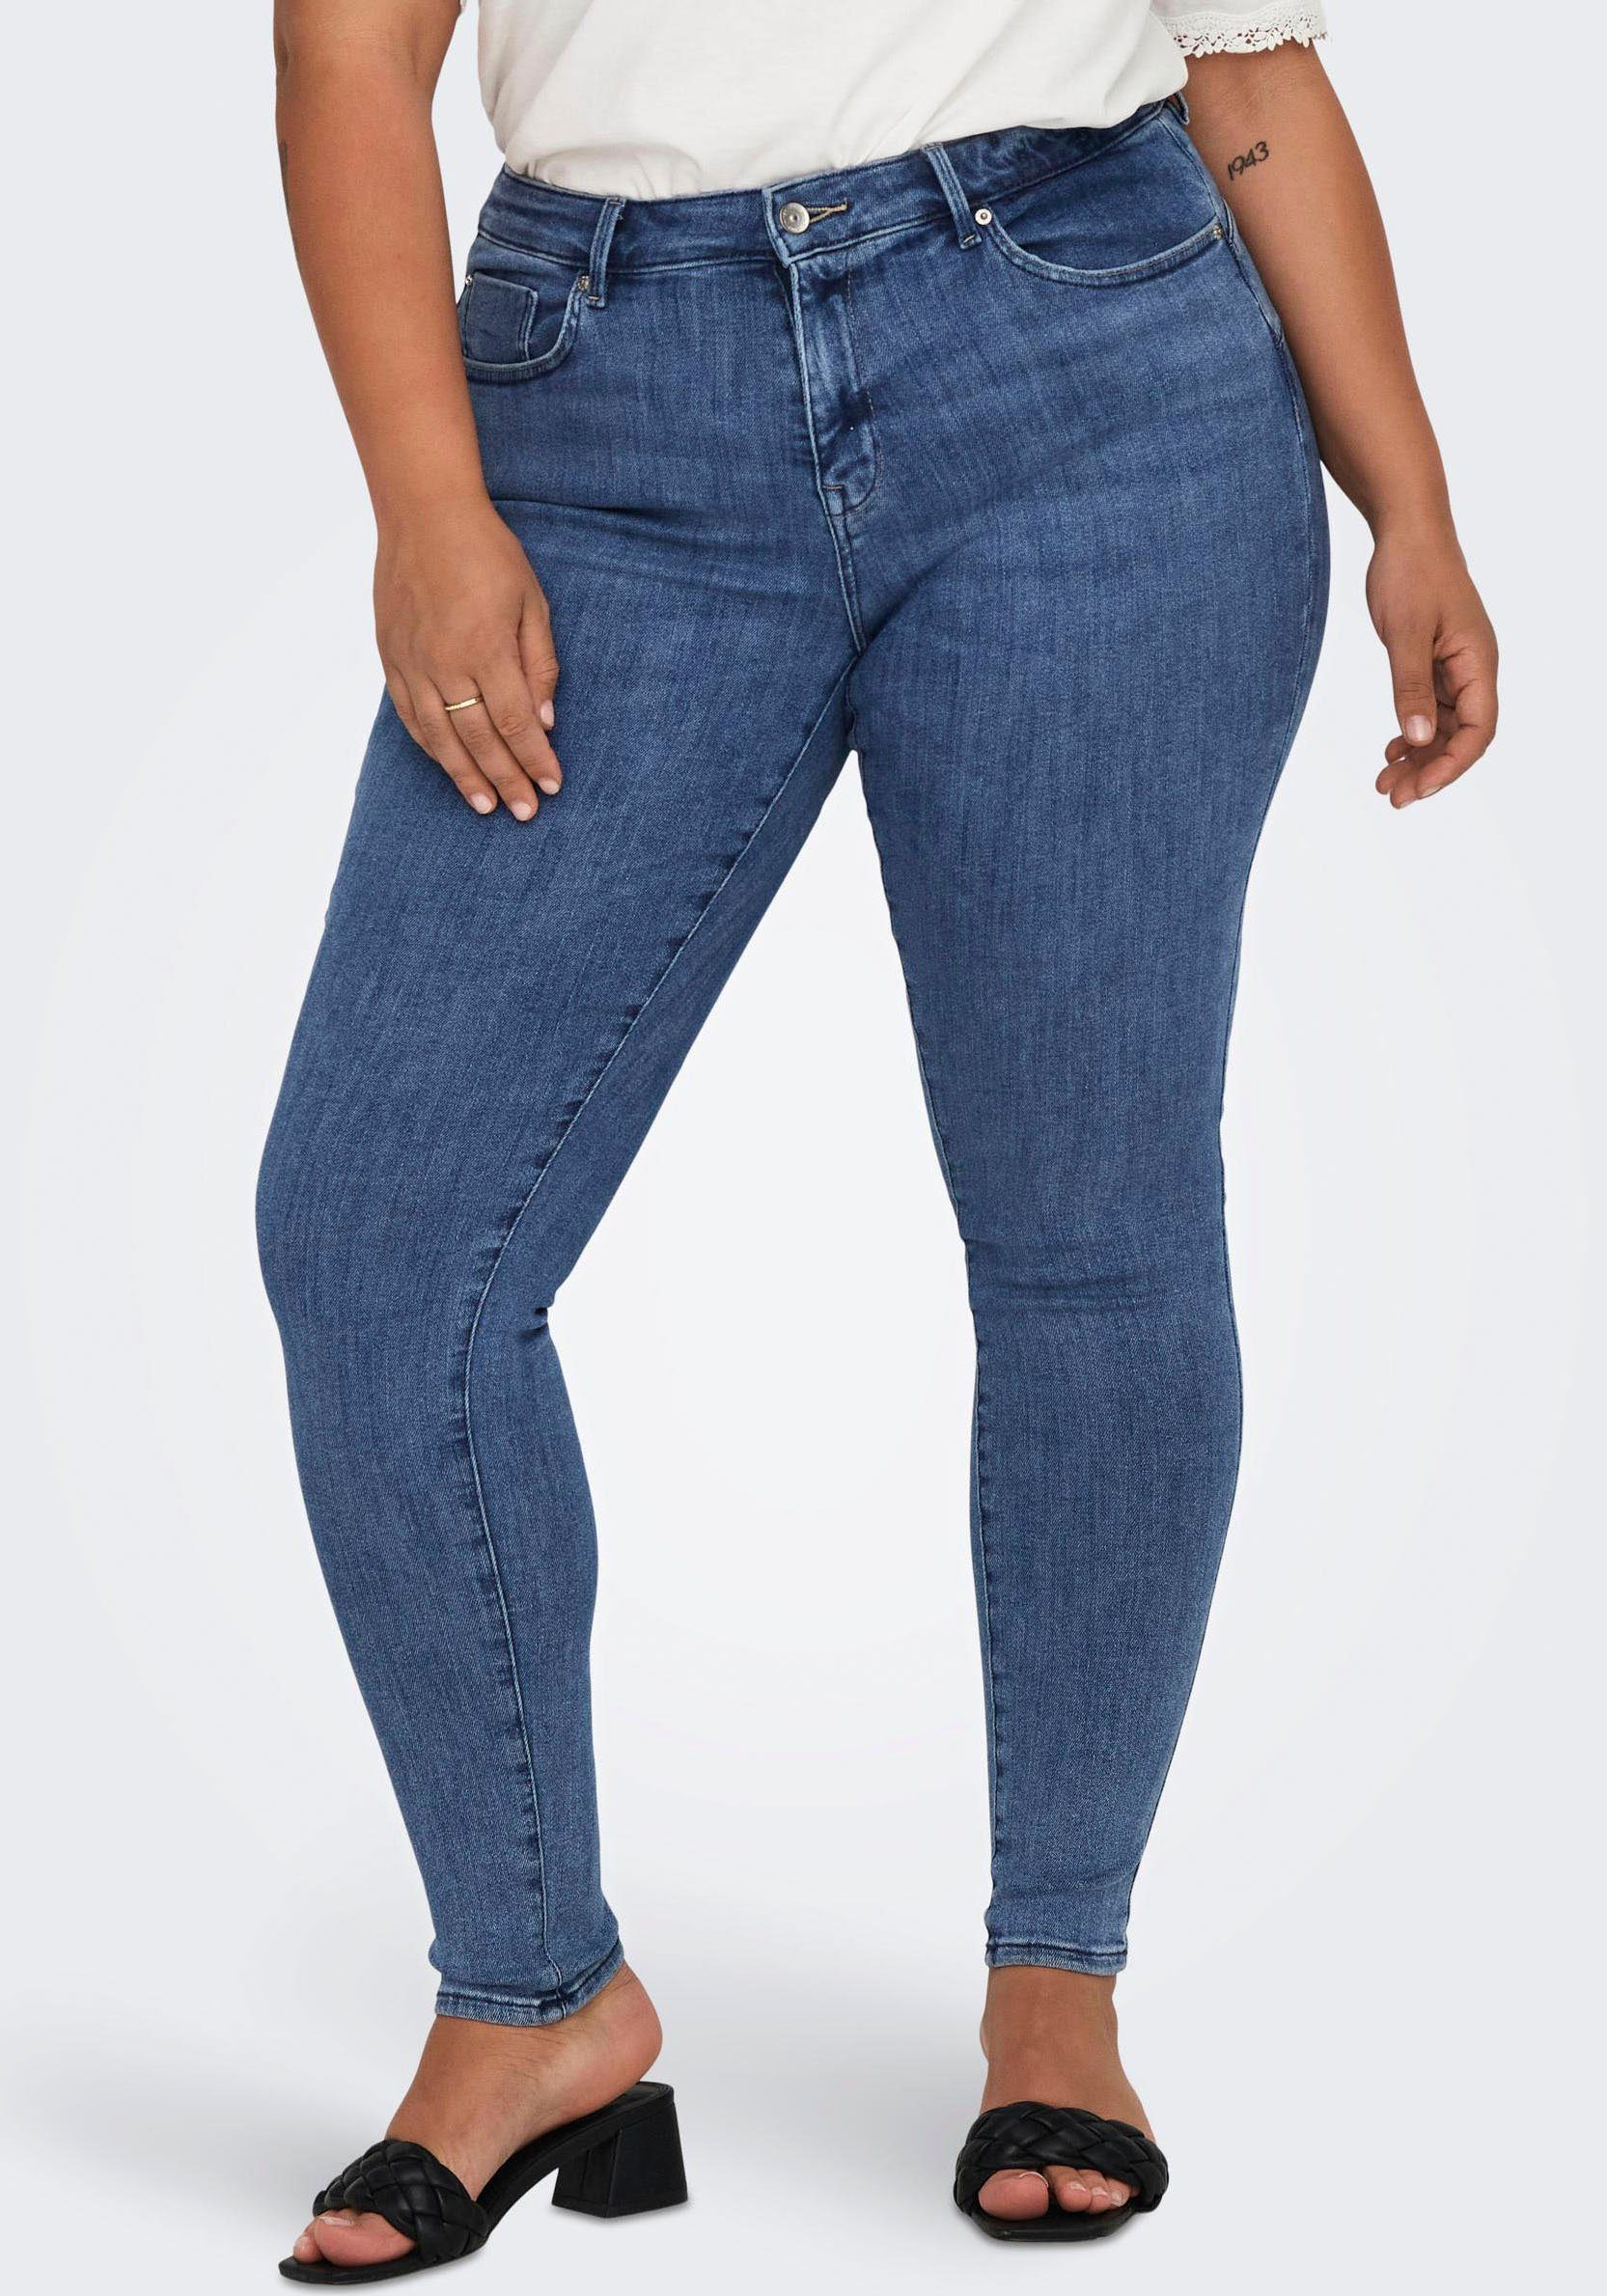 ONLY CARMAKOMA REA2981 SKINNY CARMAKOMA NOOS, Skinny von Curvy CARPOWER ONLY Skinny-fit-Jeans PUSH UP Fit MID Jeans